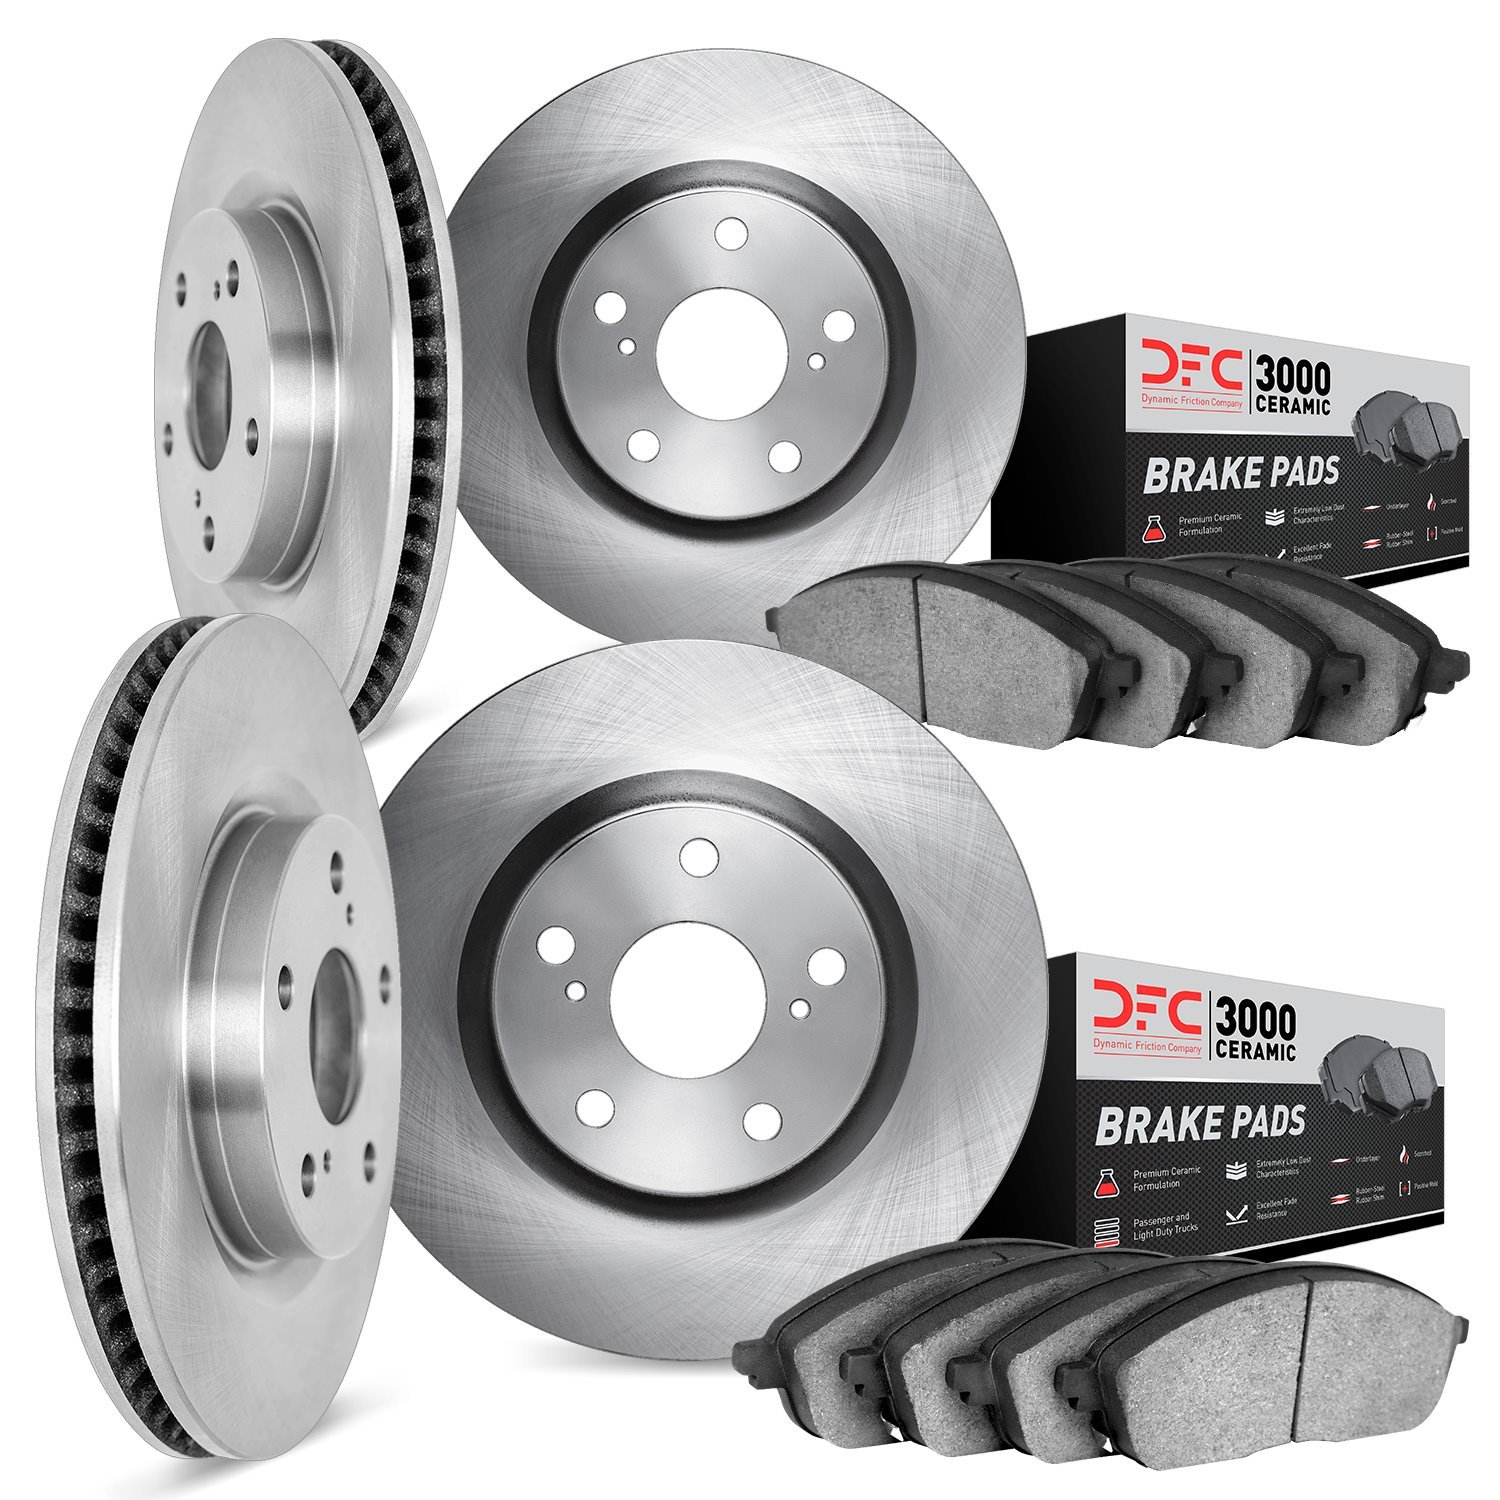 6304-02004 Brake Rotors with 3000-Series Ceramic Brake Pads Kit, 1987-1989 Porsche, Position: Front and Rear